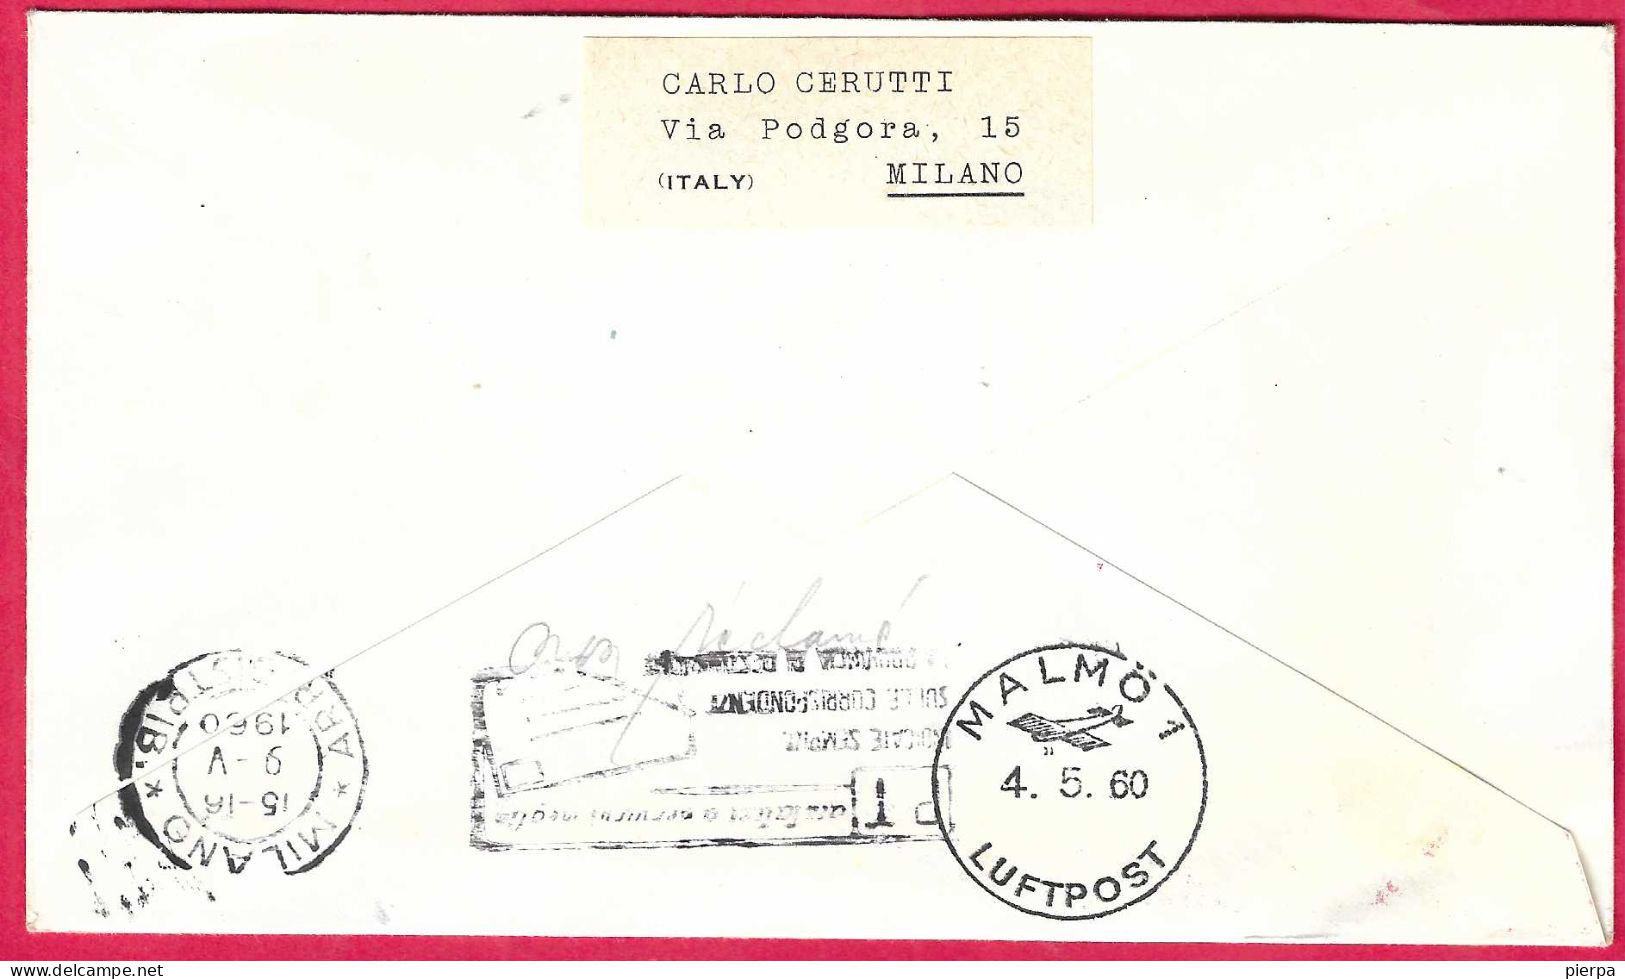 FINLAND - FIRST CARAVELLE FLIGHT FINNAIR FROM HELSINKI TO MALMO *23.4.60* ON OFFICIAL COVER - Covers & Documents